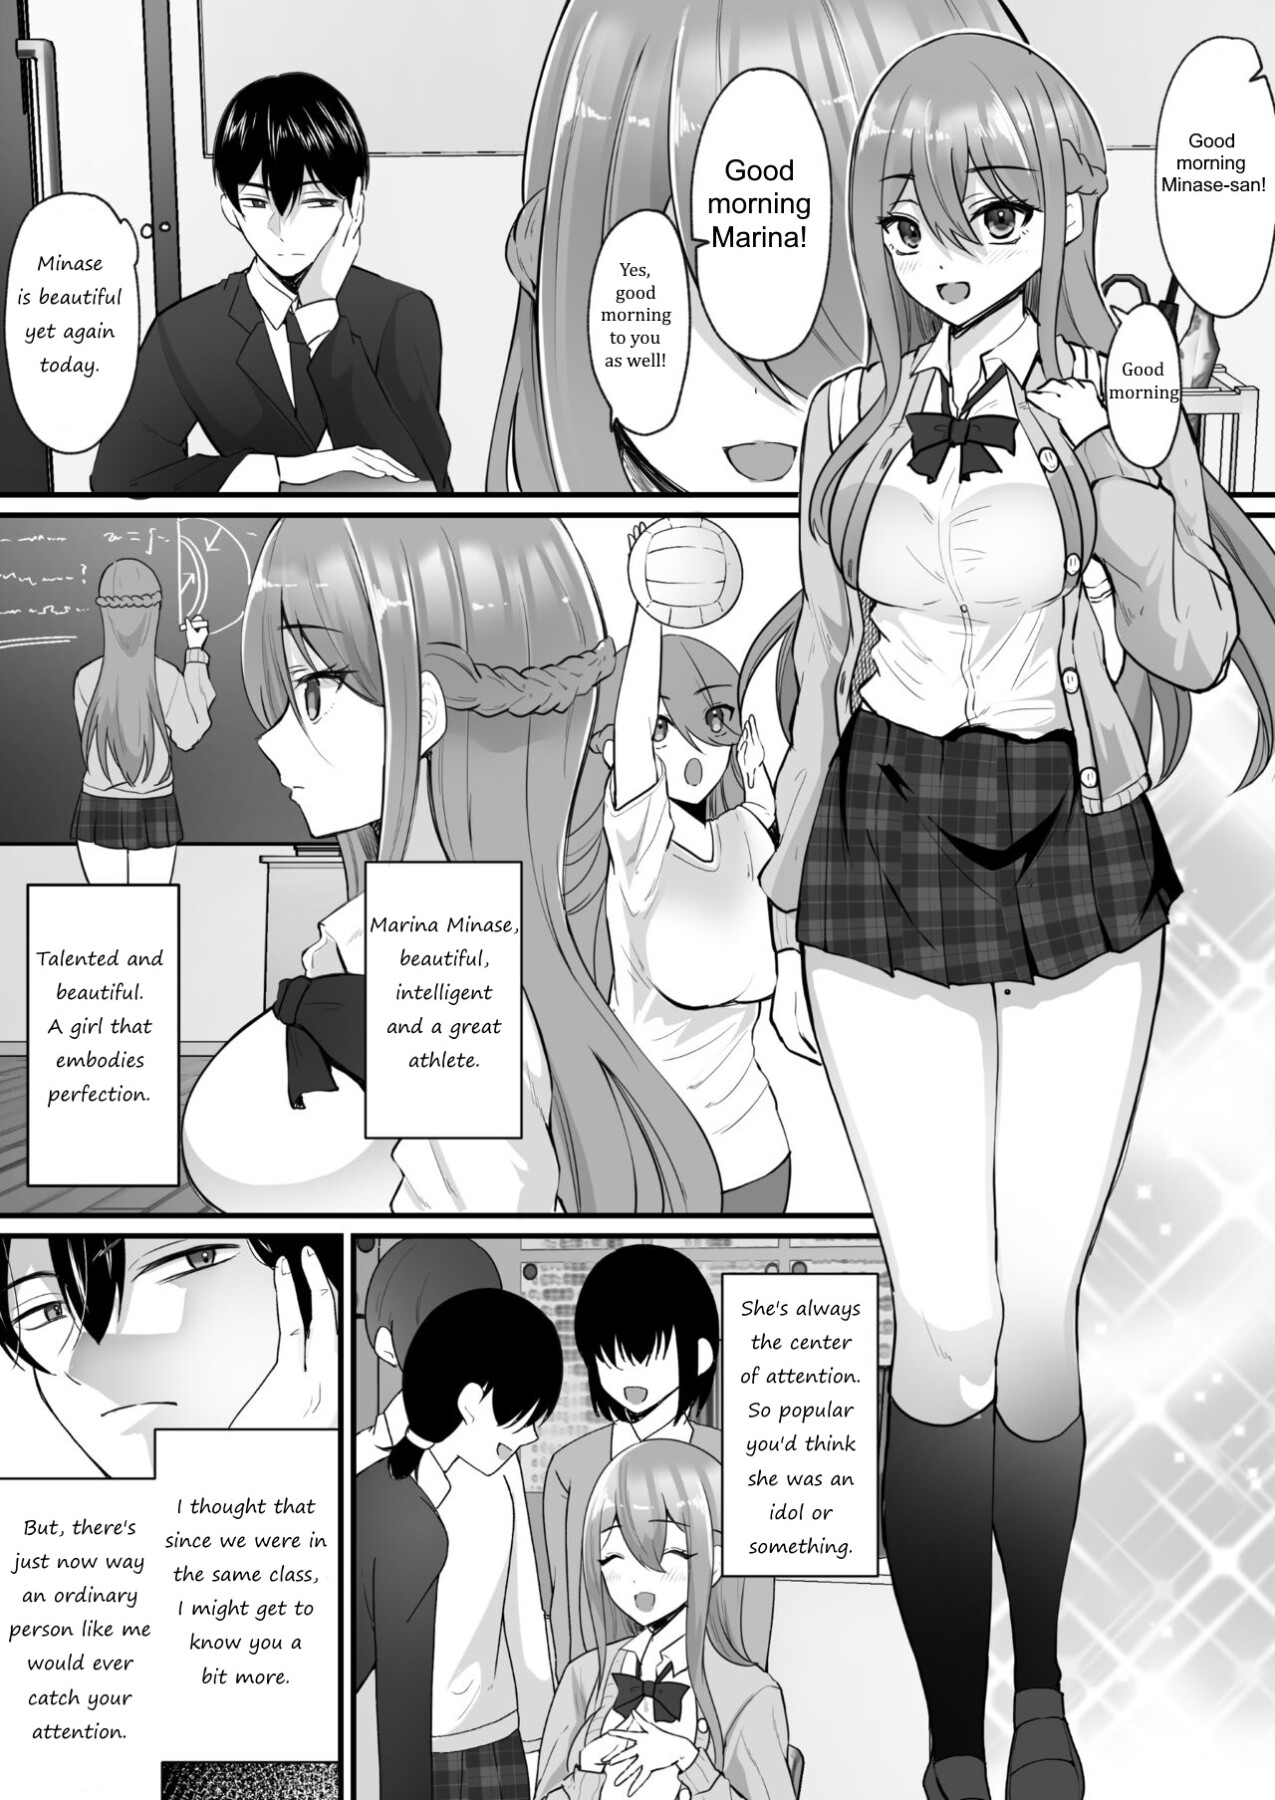 Hentai Manga Comic-Usurped Possession ~My Class Idol Has Been Taken Over by Someone I Don't Know~-Read-2